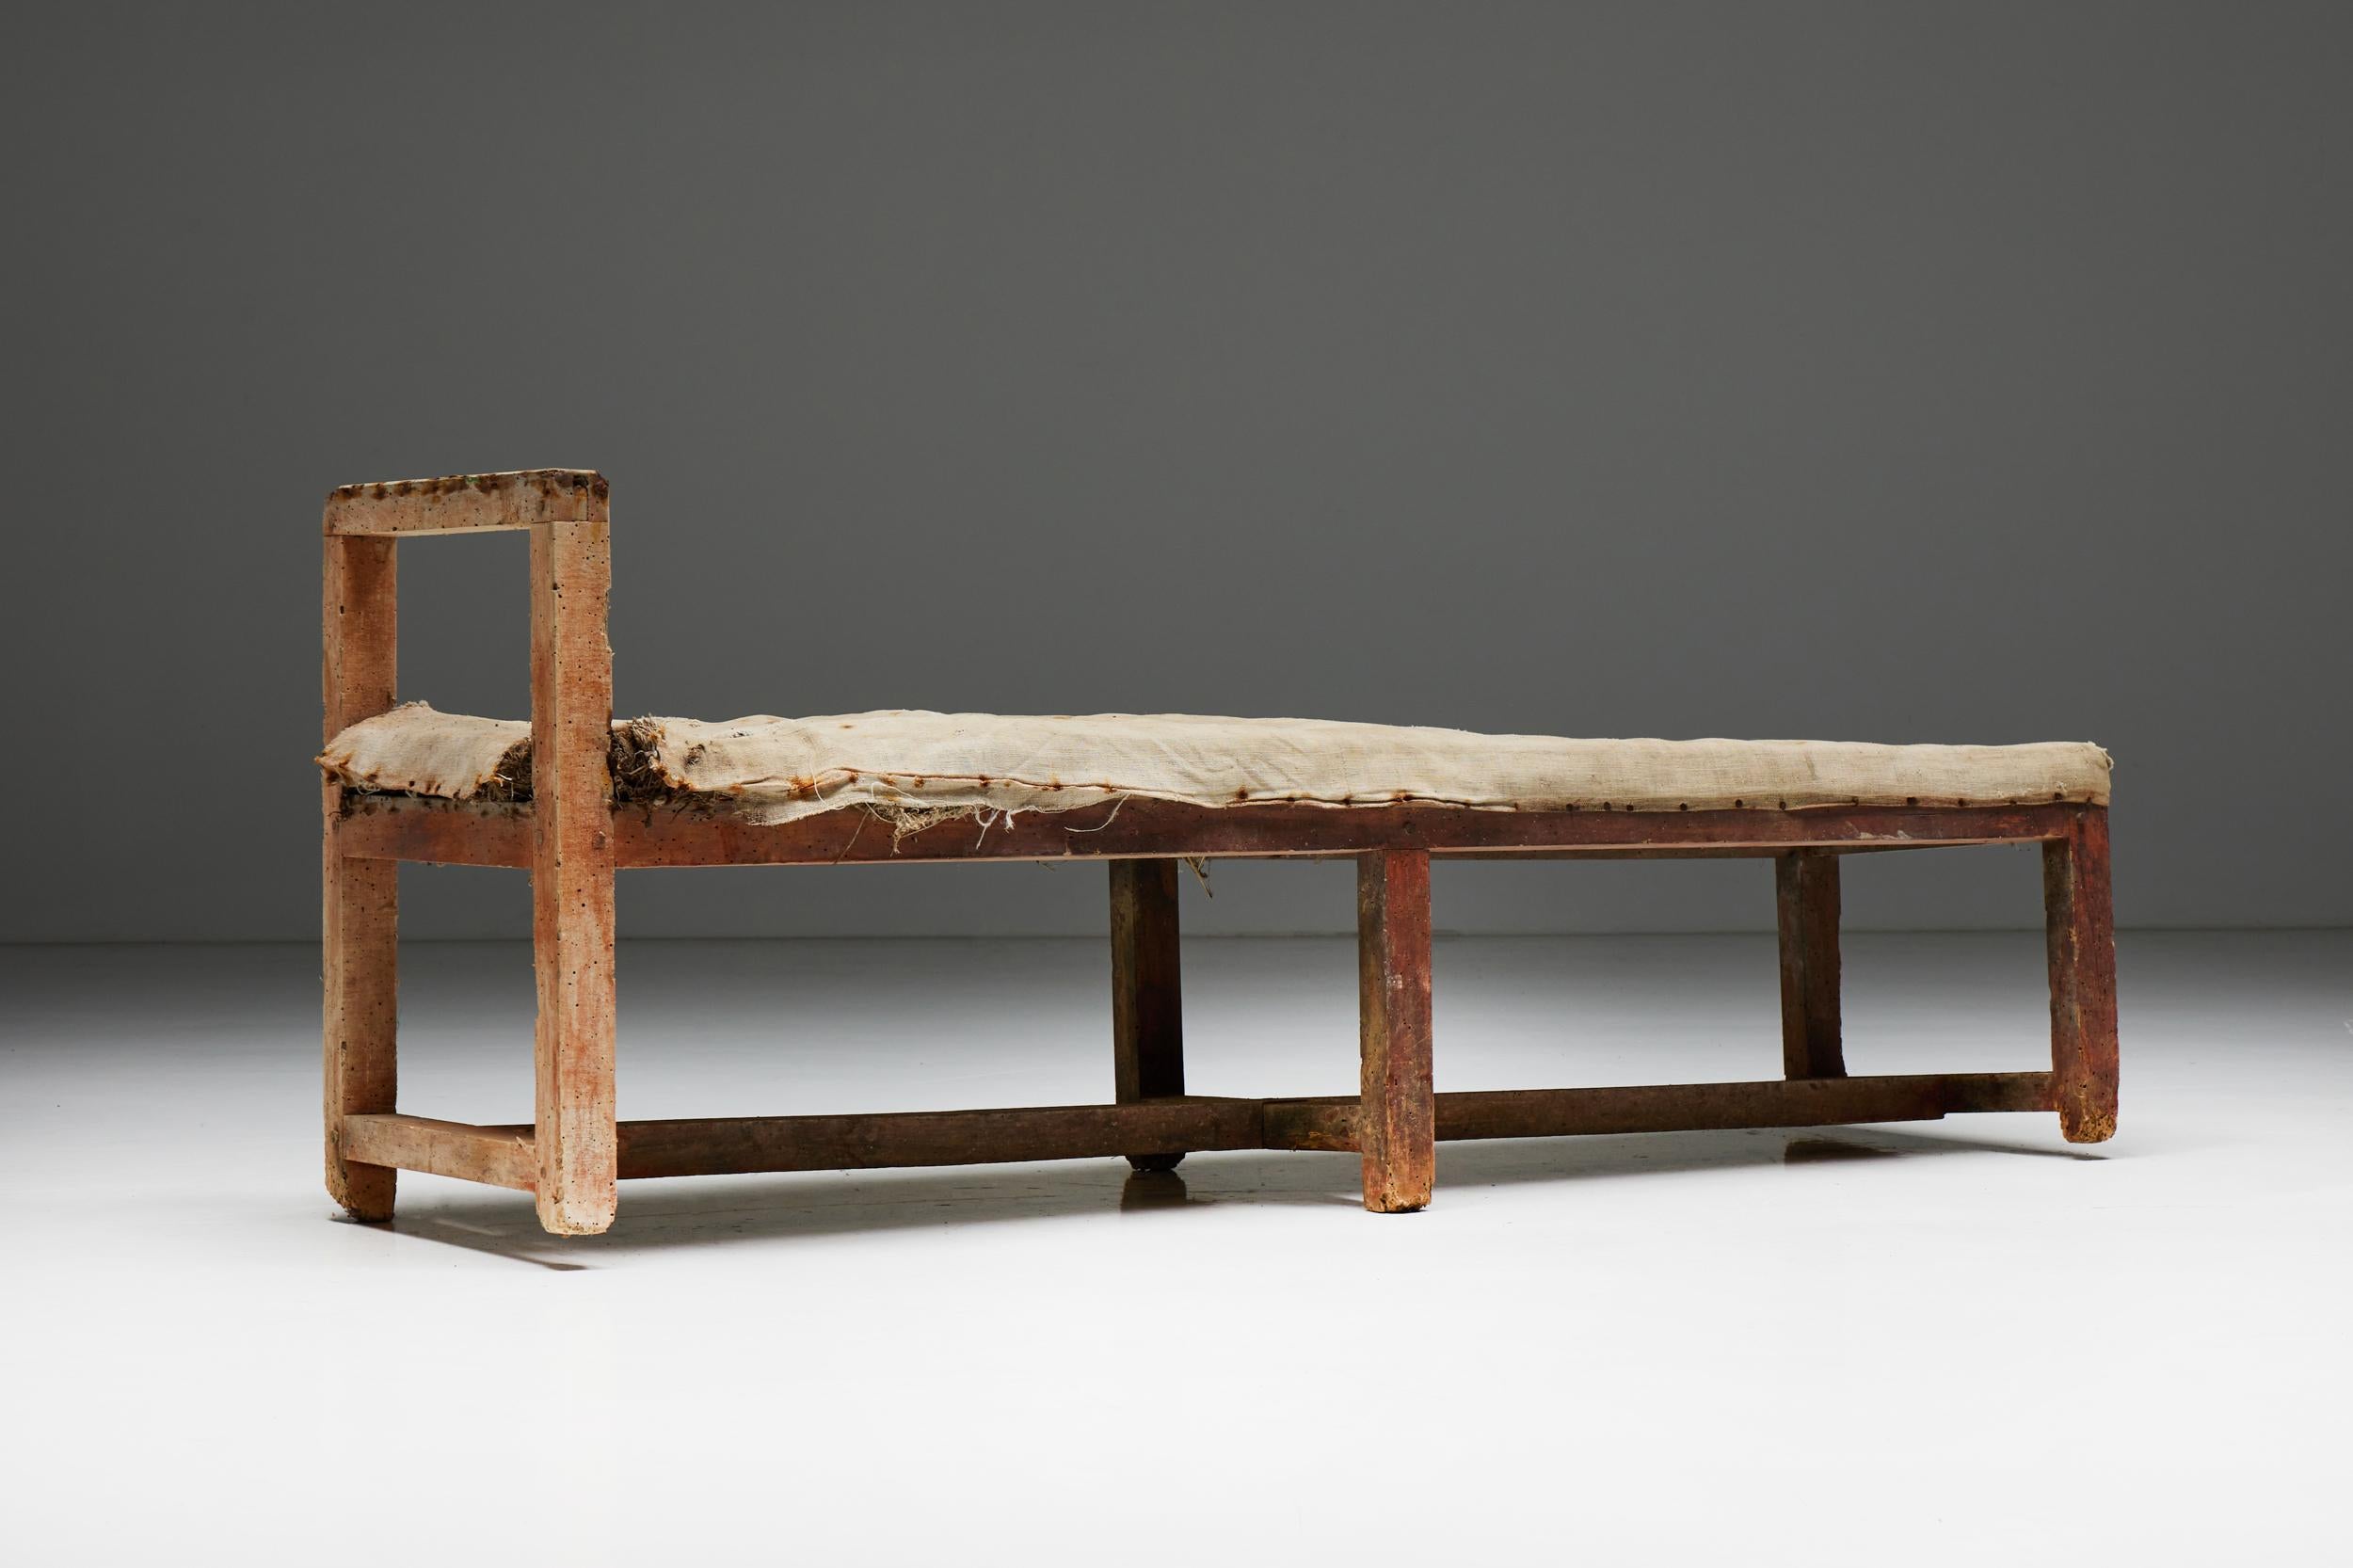 Pair of Rustic Travail Populaire Benches, France, 19th Century For Sale 6